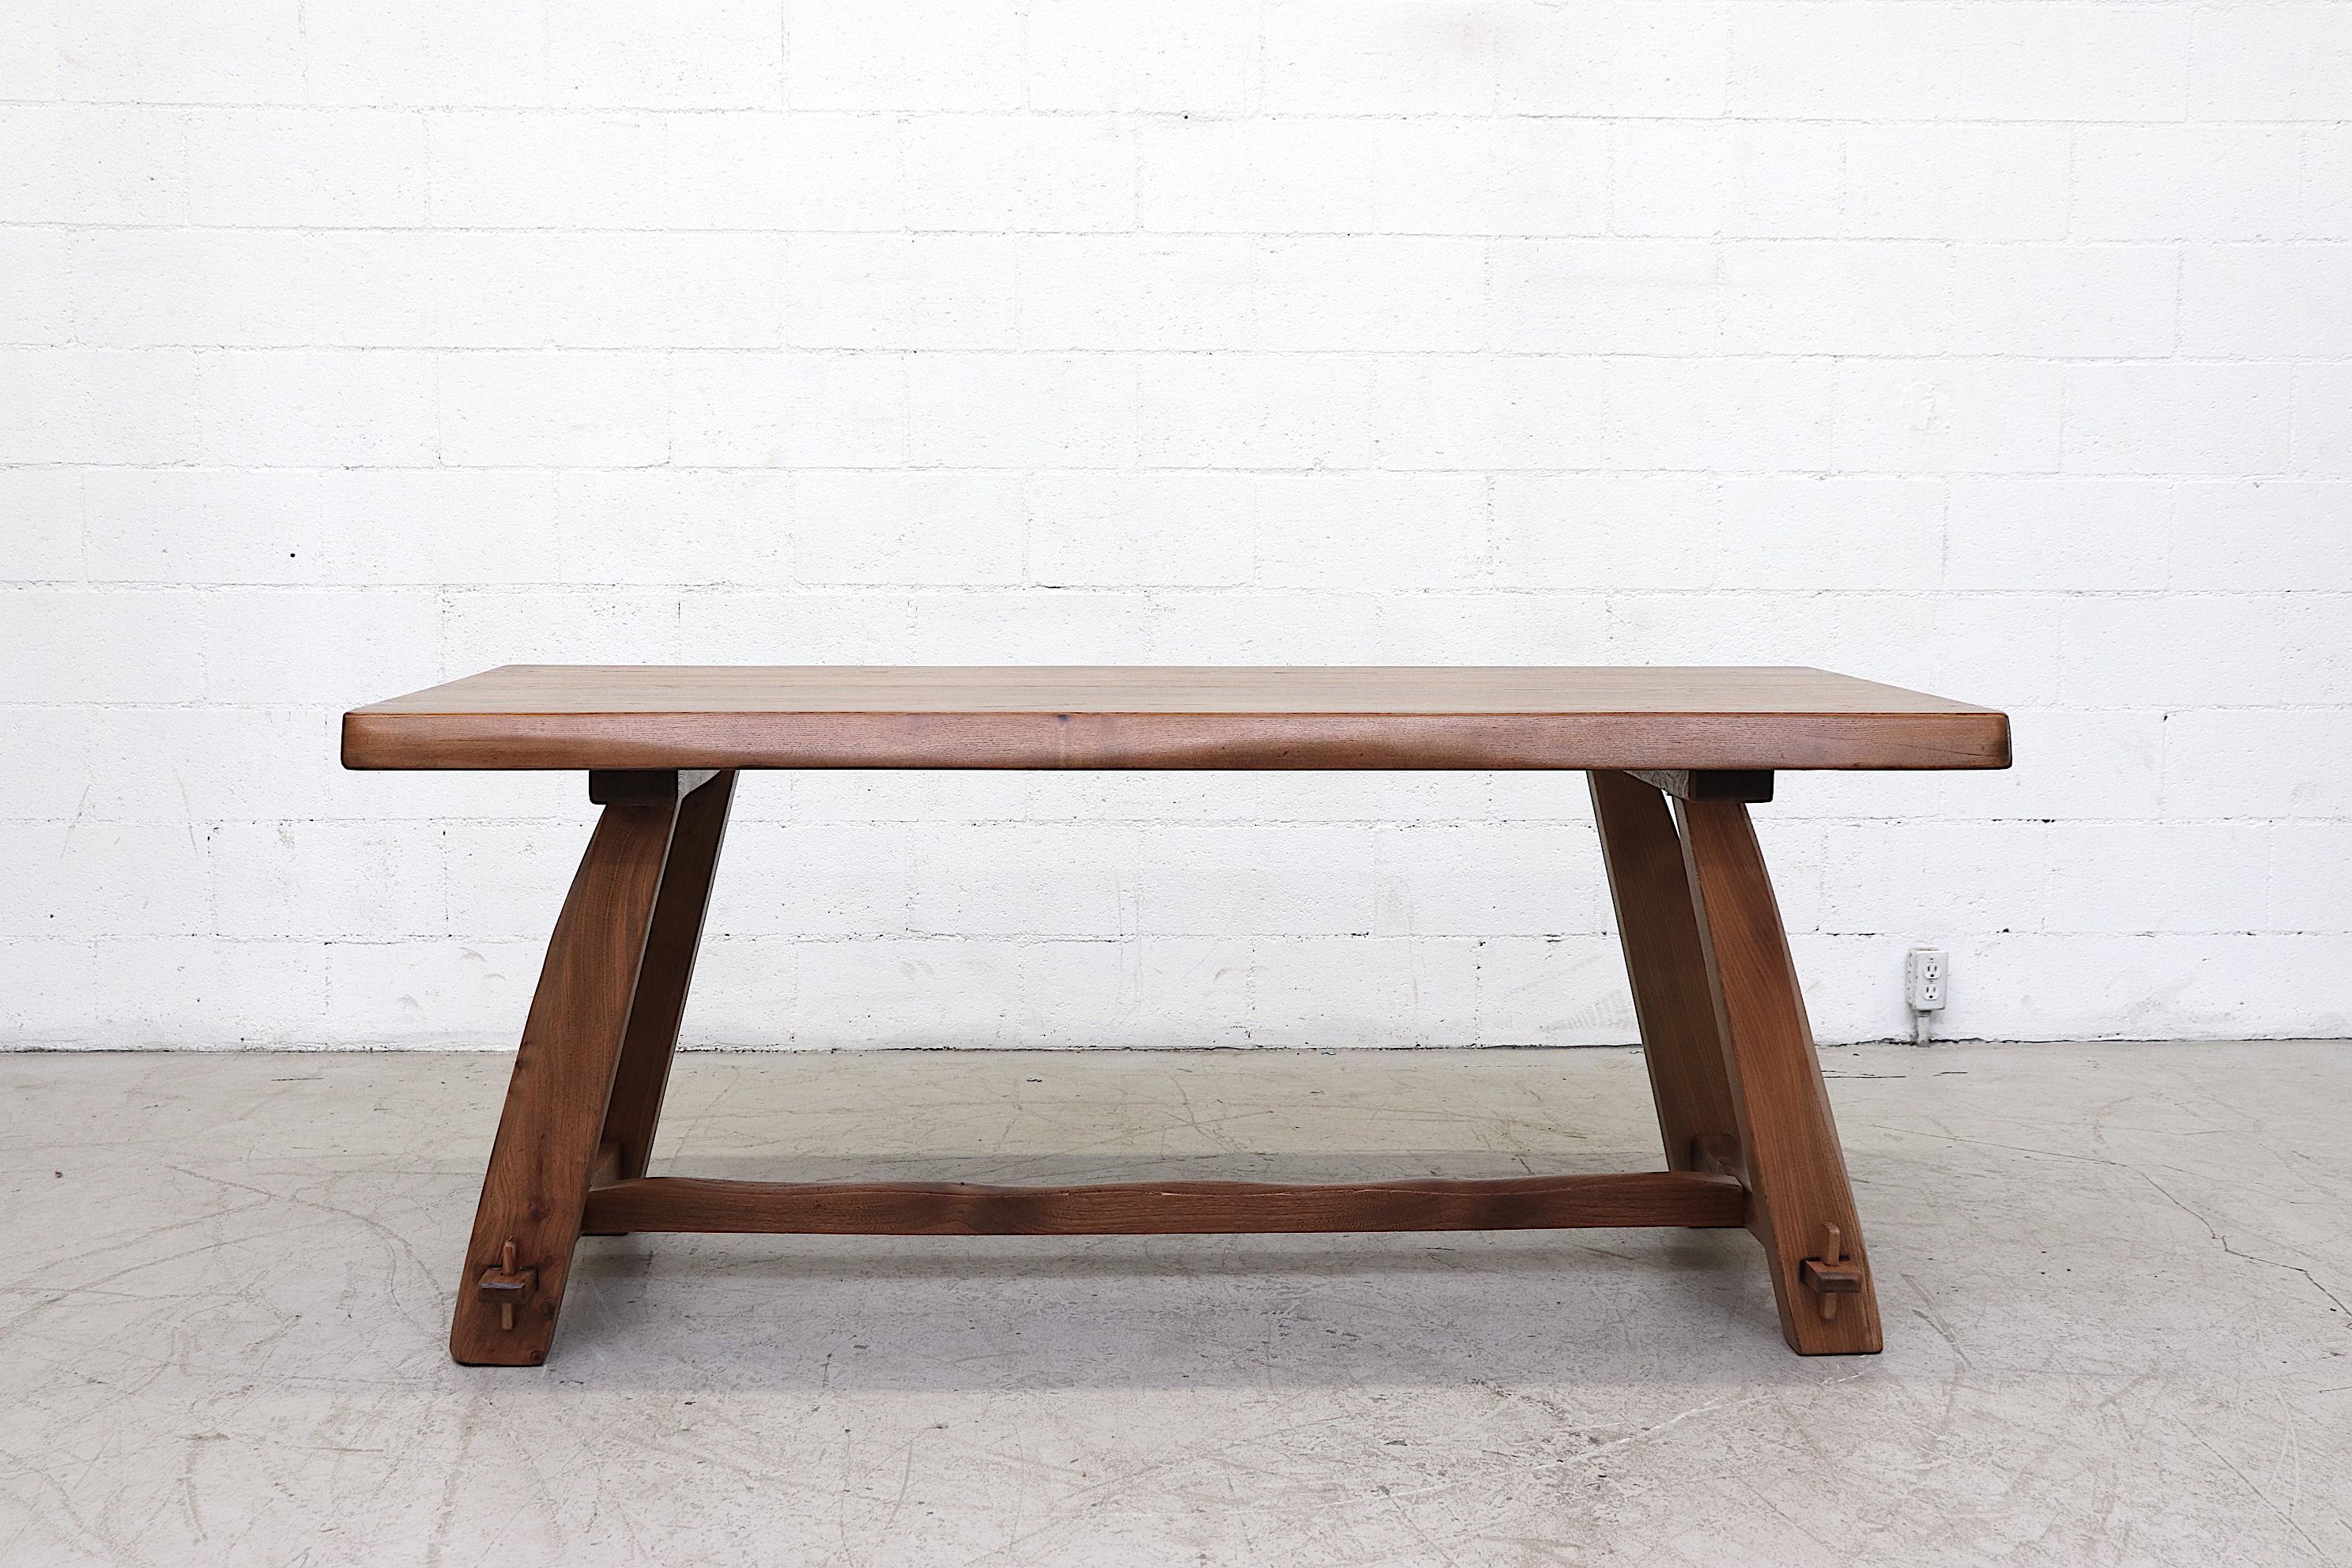 Beautiful live edge pecan dining table with trestle and wood pegs. Nicely refinished with impressive grain. Comfortably seats 6 and radiates character and style. Original condition with minimal wear. Similar tables available listed separately.